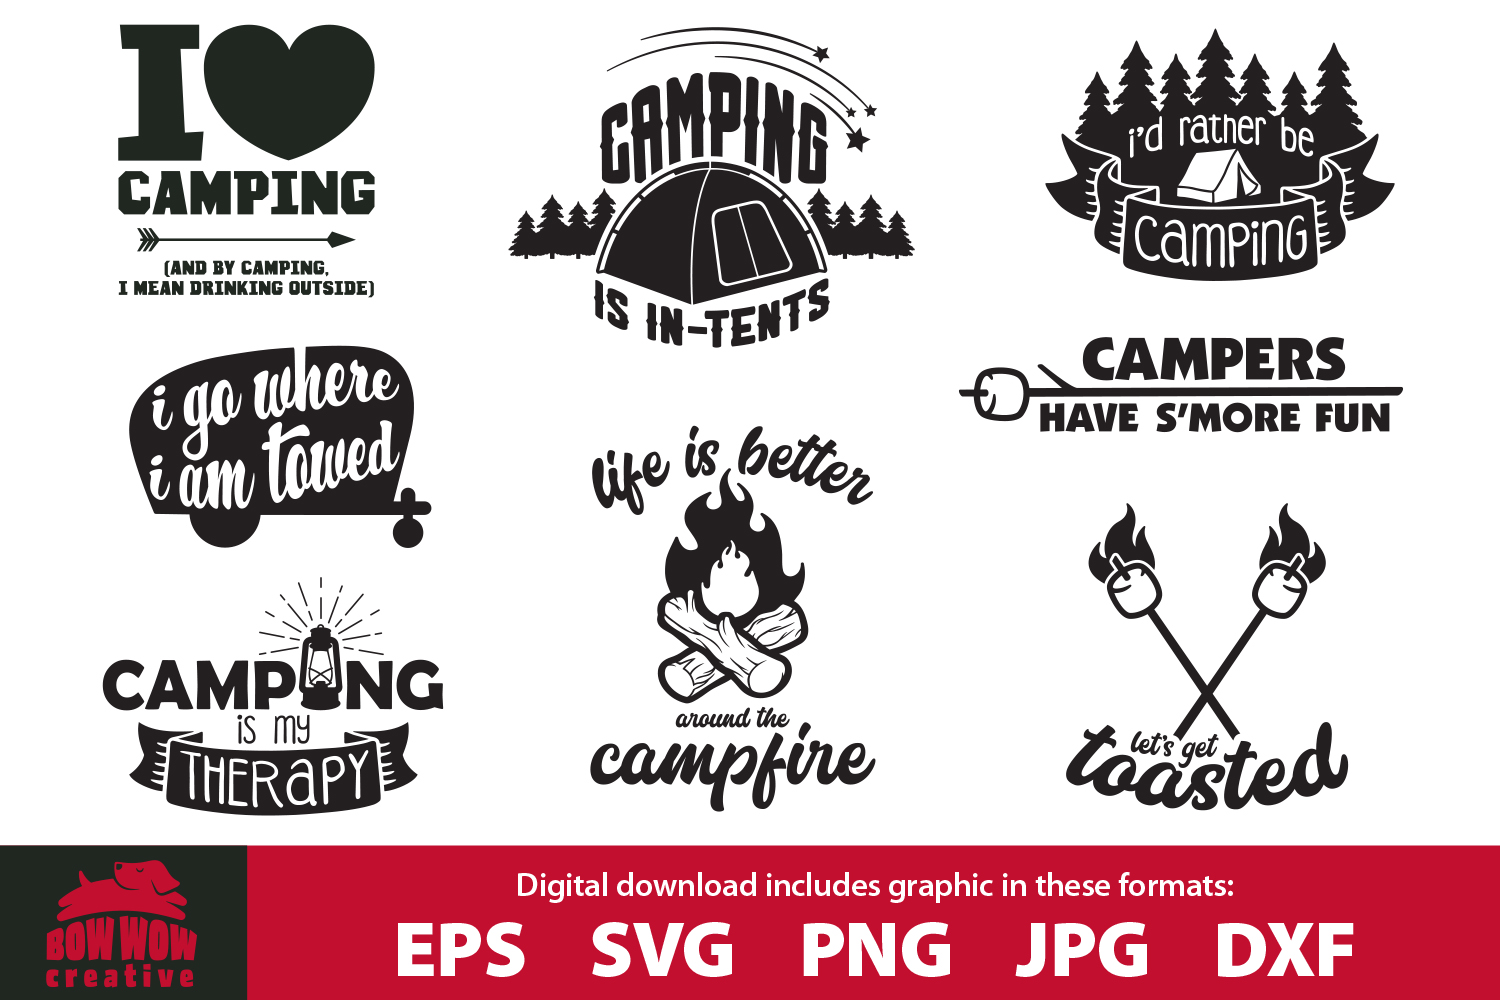 Download Camping quotes bundle - SVG, EPS, JPG, PNG, DXF